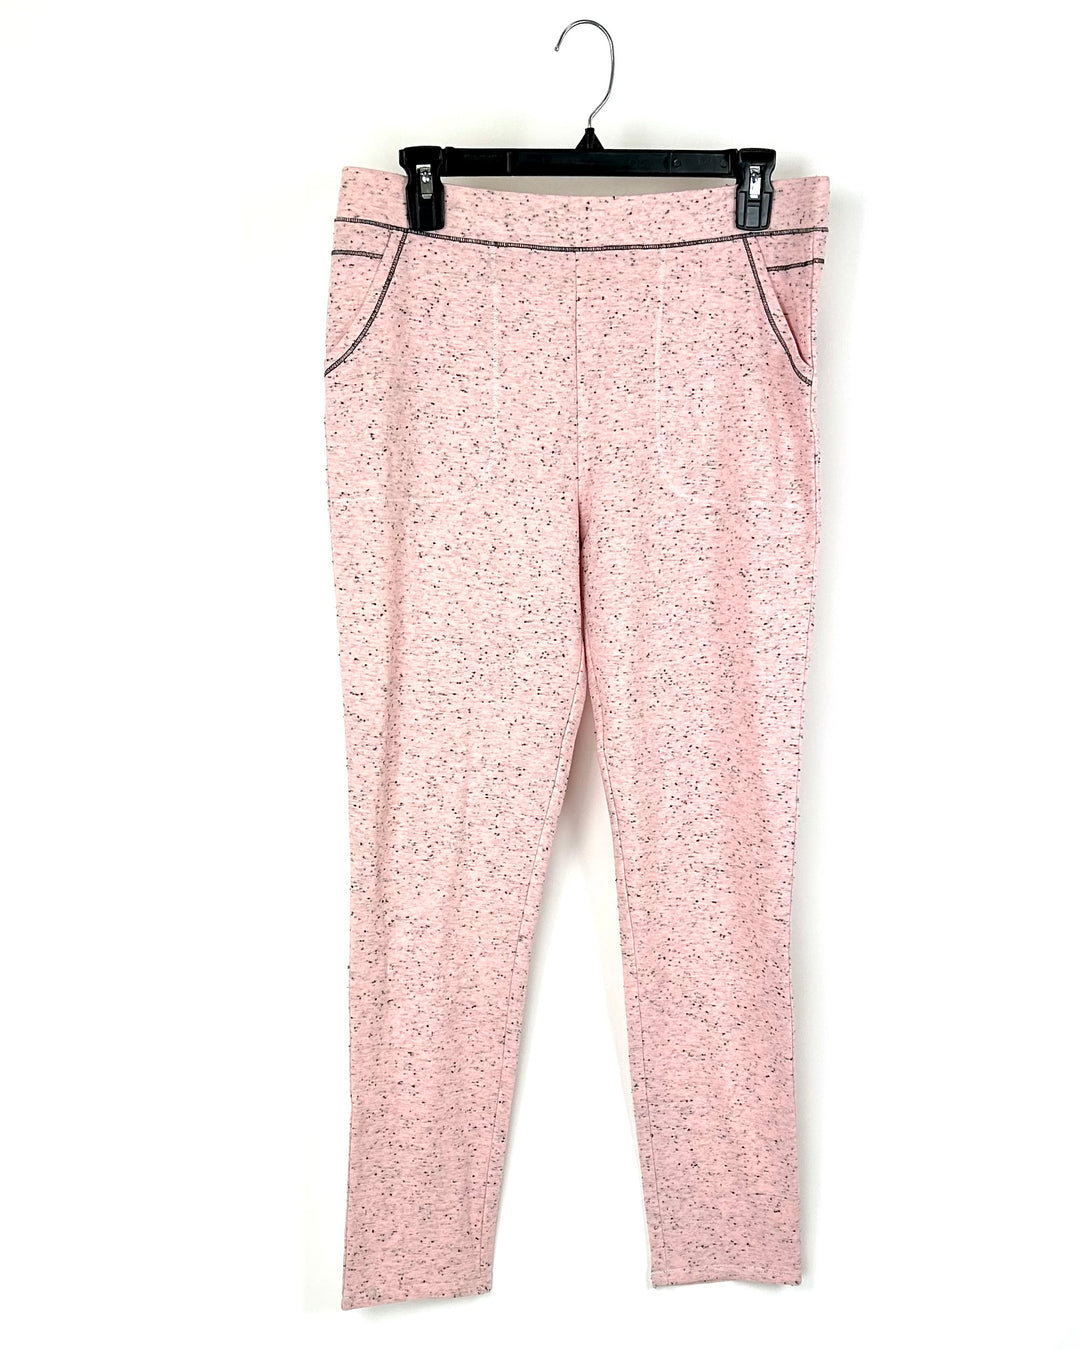 Pink and Black Joggers - Size 8/10